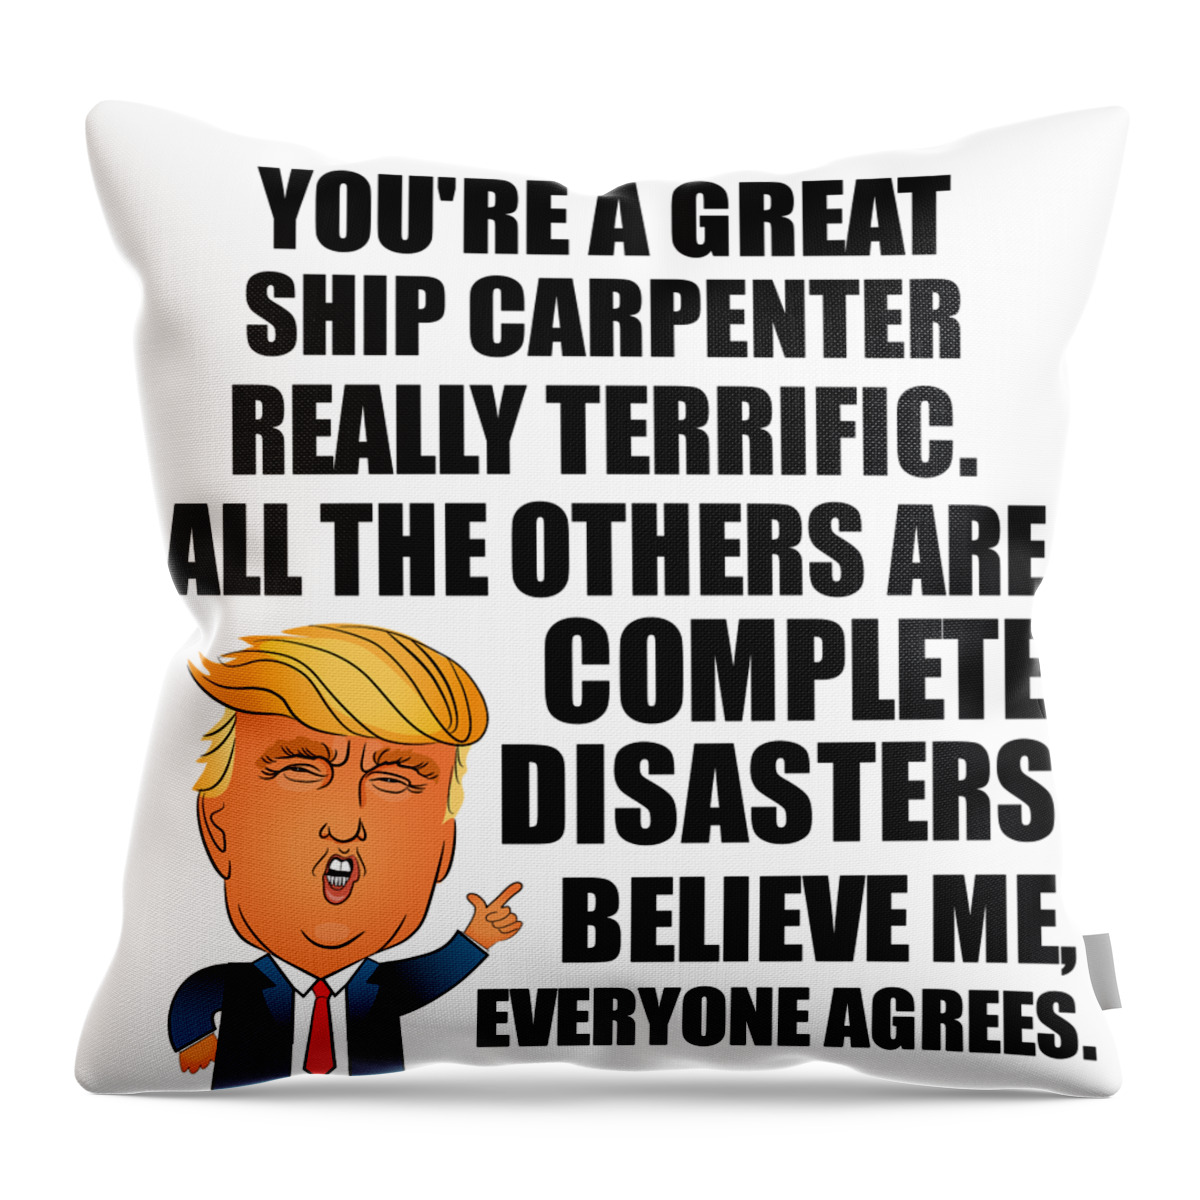 Ship Carpenter Throw Pillow featuring the digital art Trump Ship Carpenter Funny Gift for Ship Carpenter Coworker Gag Great Terrific President Fan Potus Quote Office Joke by Jeff Creation